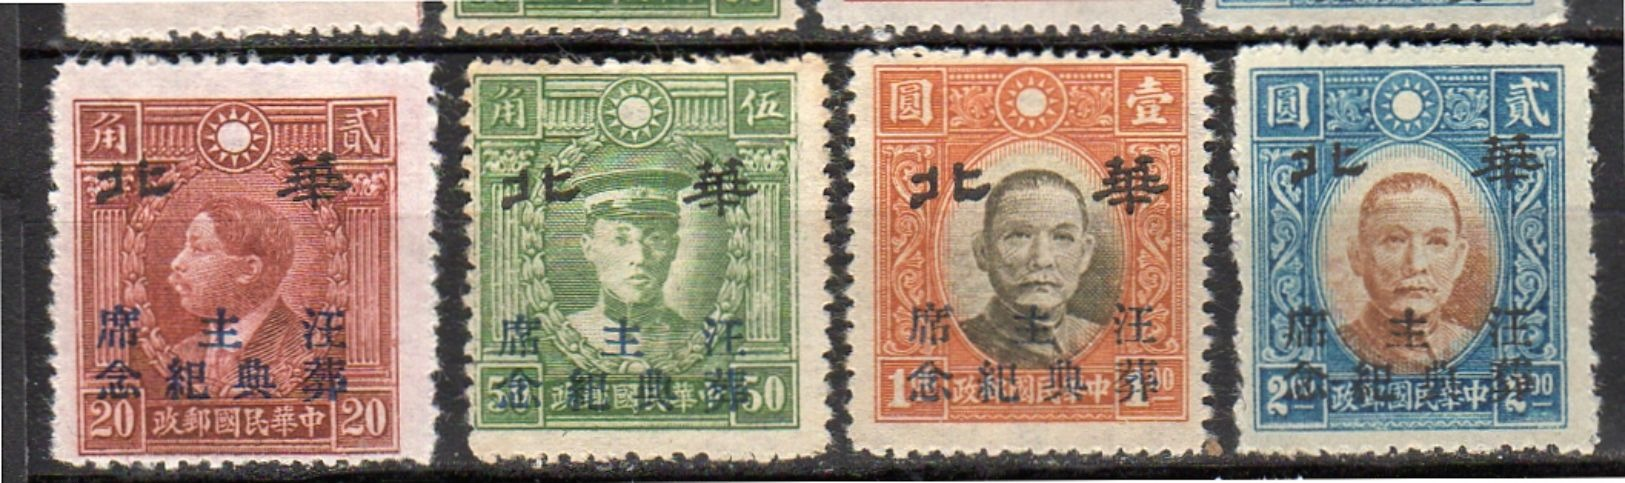 1944 Wang Ching-wei Von Nanking Chan# JN674 -7 Several Paper Types (issued Without Gum) Scarce & Undervalued (26c) - 1941-45 Chine Du Nord